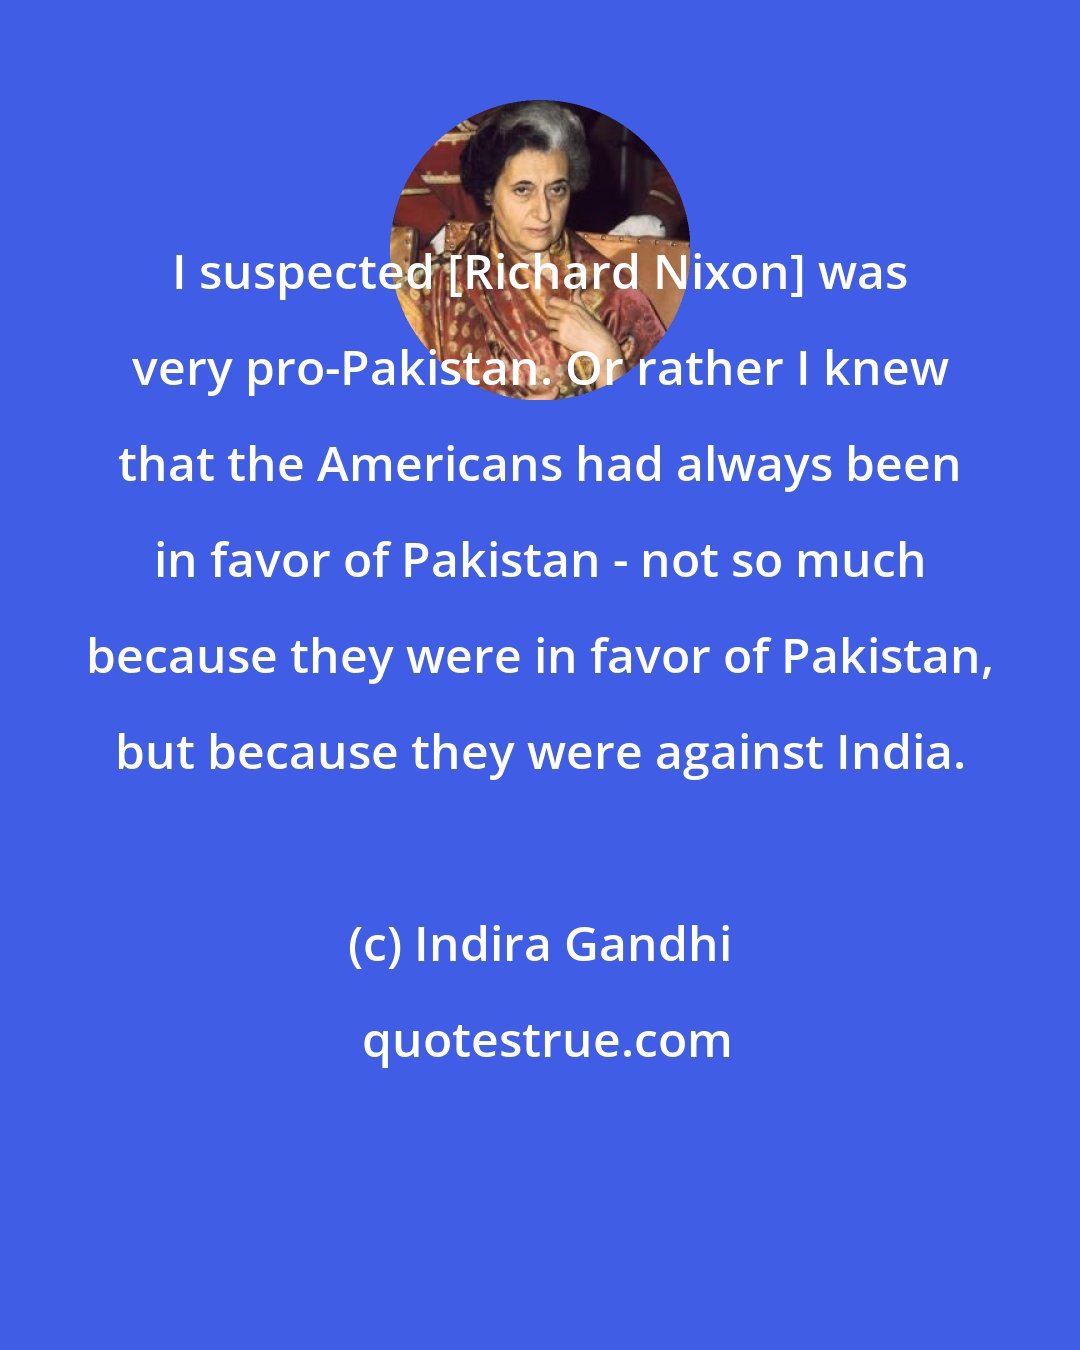 Indira Gandhi: I suspected [Richard Nixon] was very pro-Pakistan. Or rather I knew that the Americans had always been in favor of Pakistan - not so much because they were in favor of Pakistan, but because they were against India.